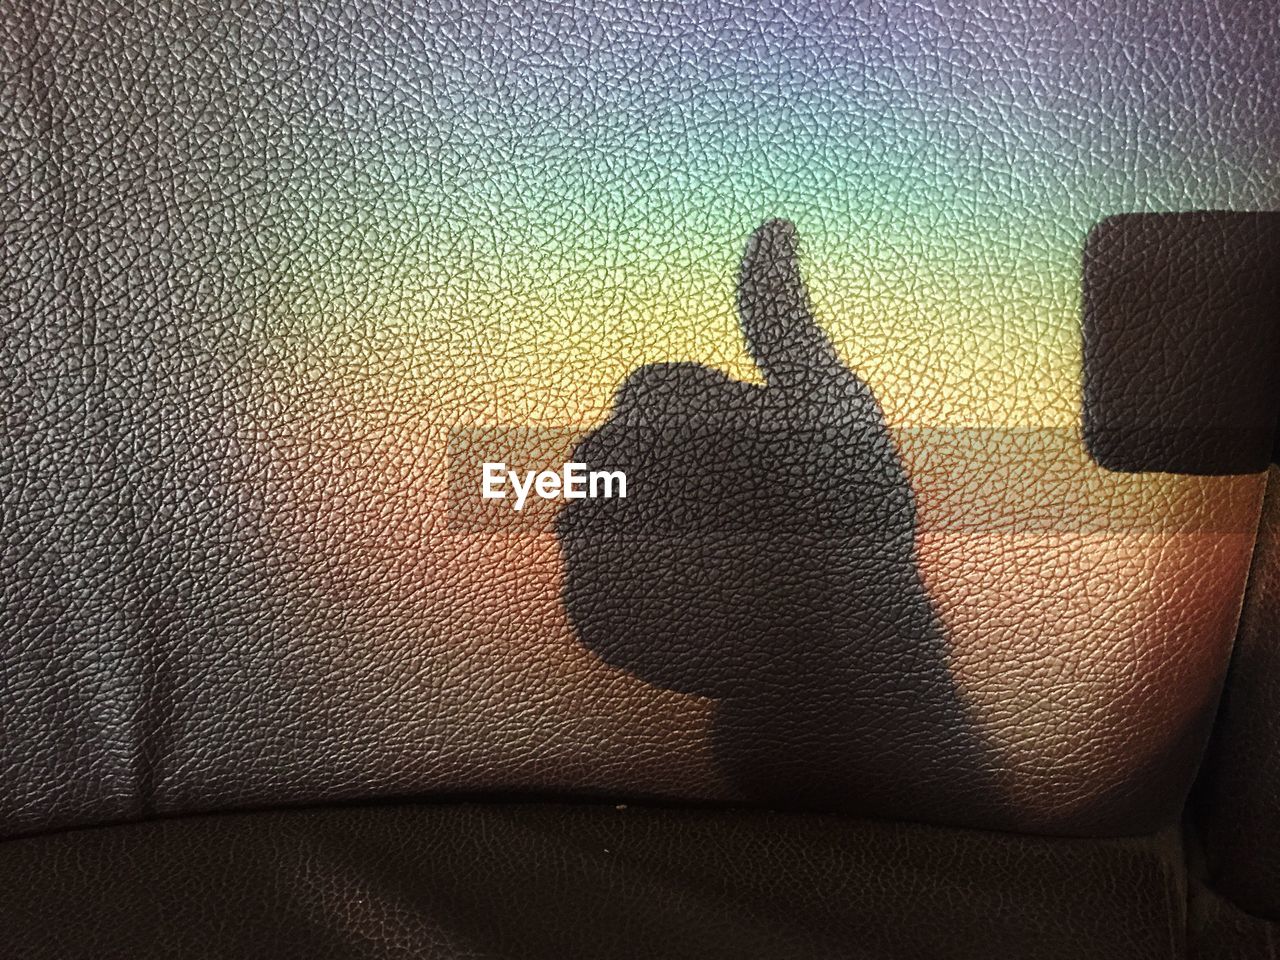 Shadow of hand on seat